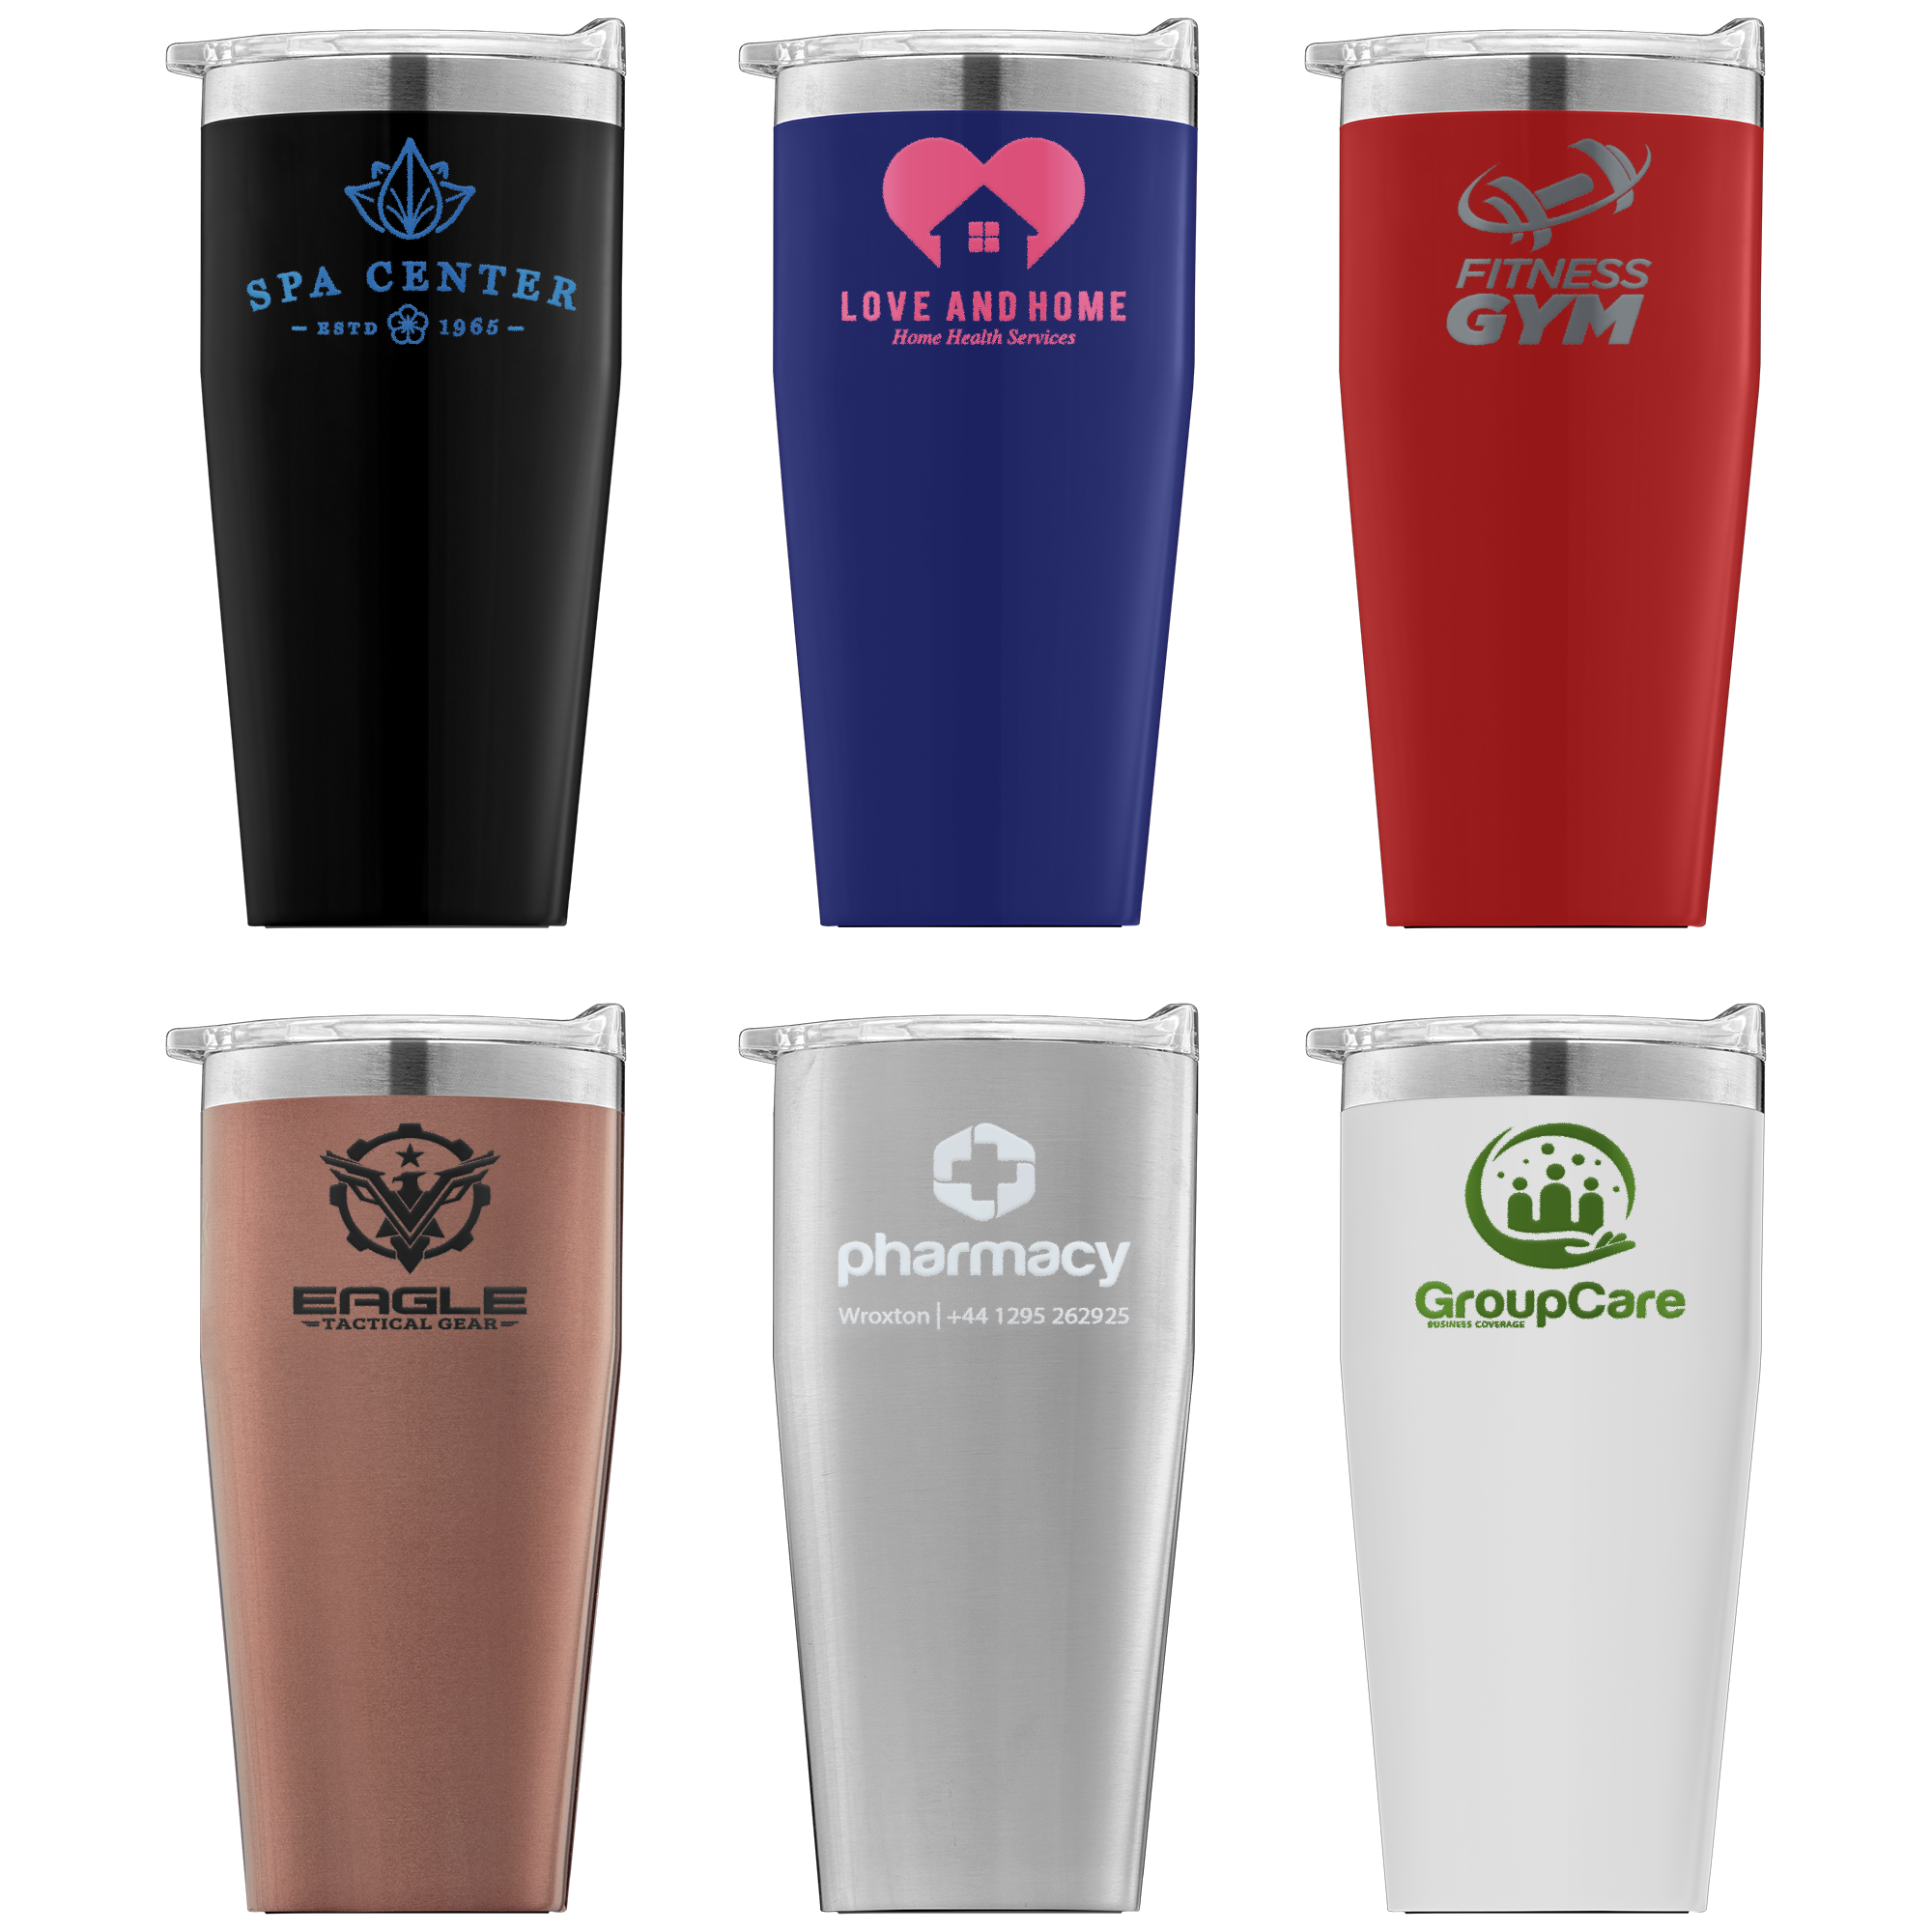 Solo Cup Style Double Wall Custom Tumbler - Colors - 16 oz.